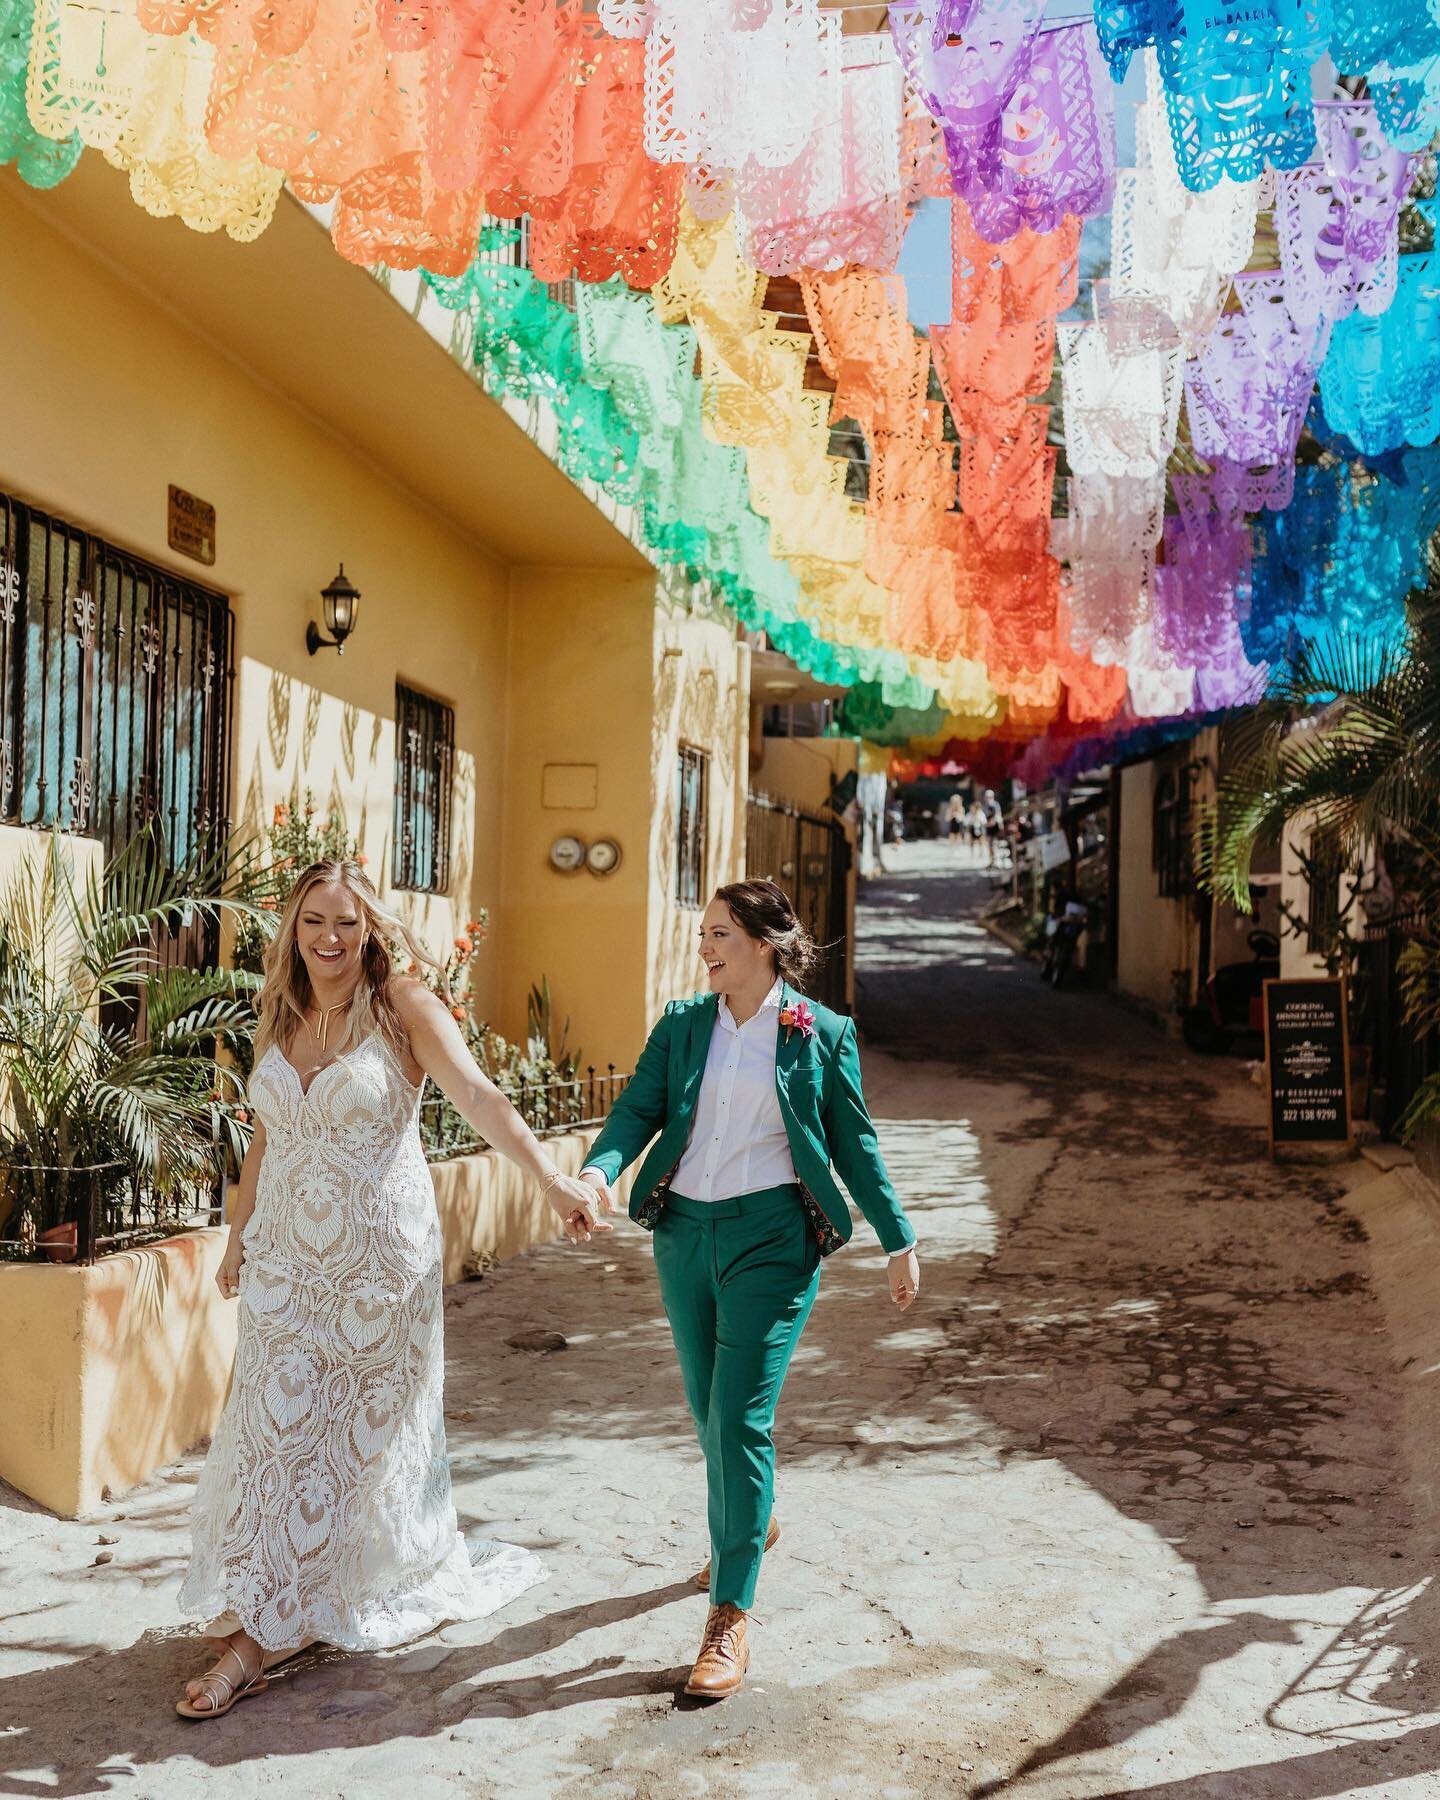 Have you ever thought about eloping in Mexico? Now is the time! The WVEC team is heading to Mexico and would love to plan your dream Elopement. Last year, we all spent time in Sayulita, Mexico and fell in love with the &ldquo;city of good vibes.&rdqu